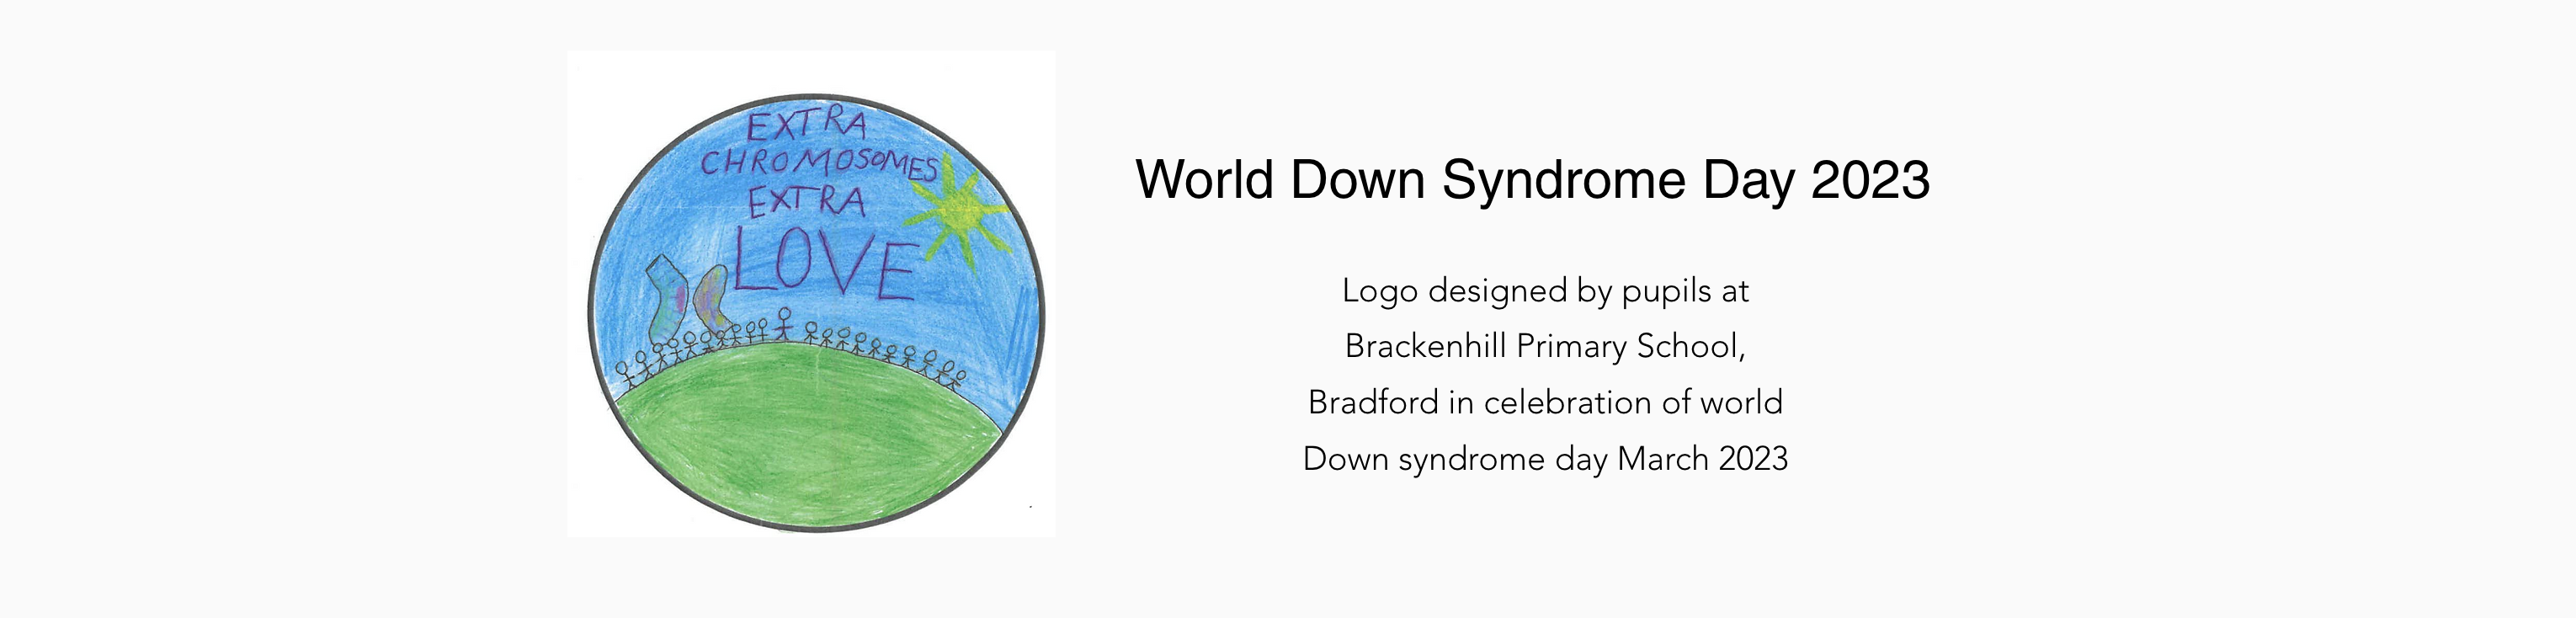 Down Syndrome Training & Support Service Ltd